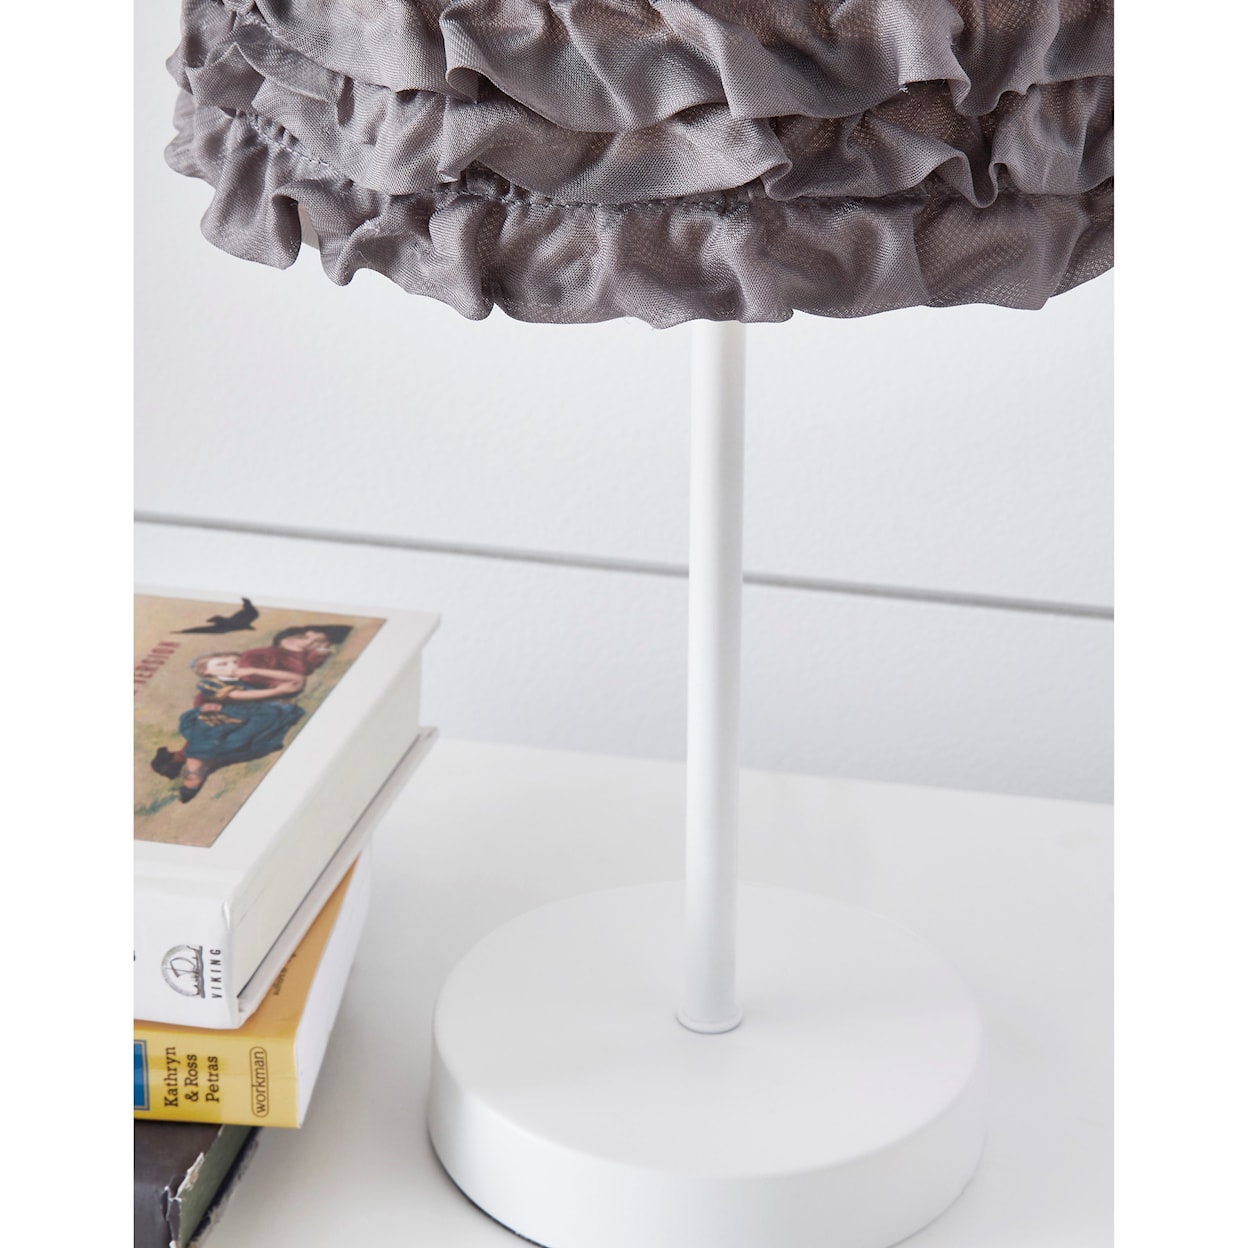 Benchcraft Lamps - Casual Mirette Gray/White Metal Table Lamp